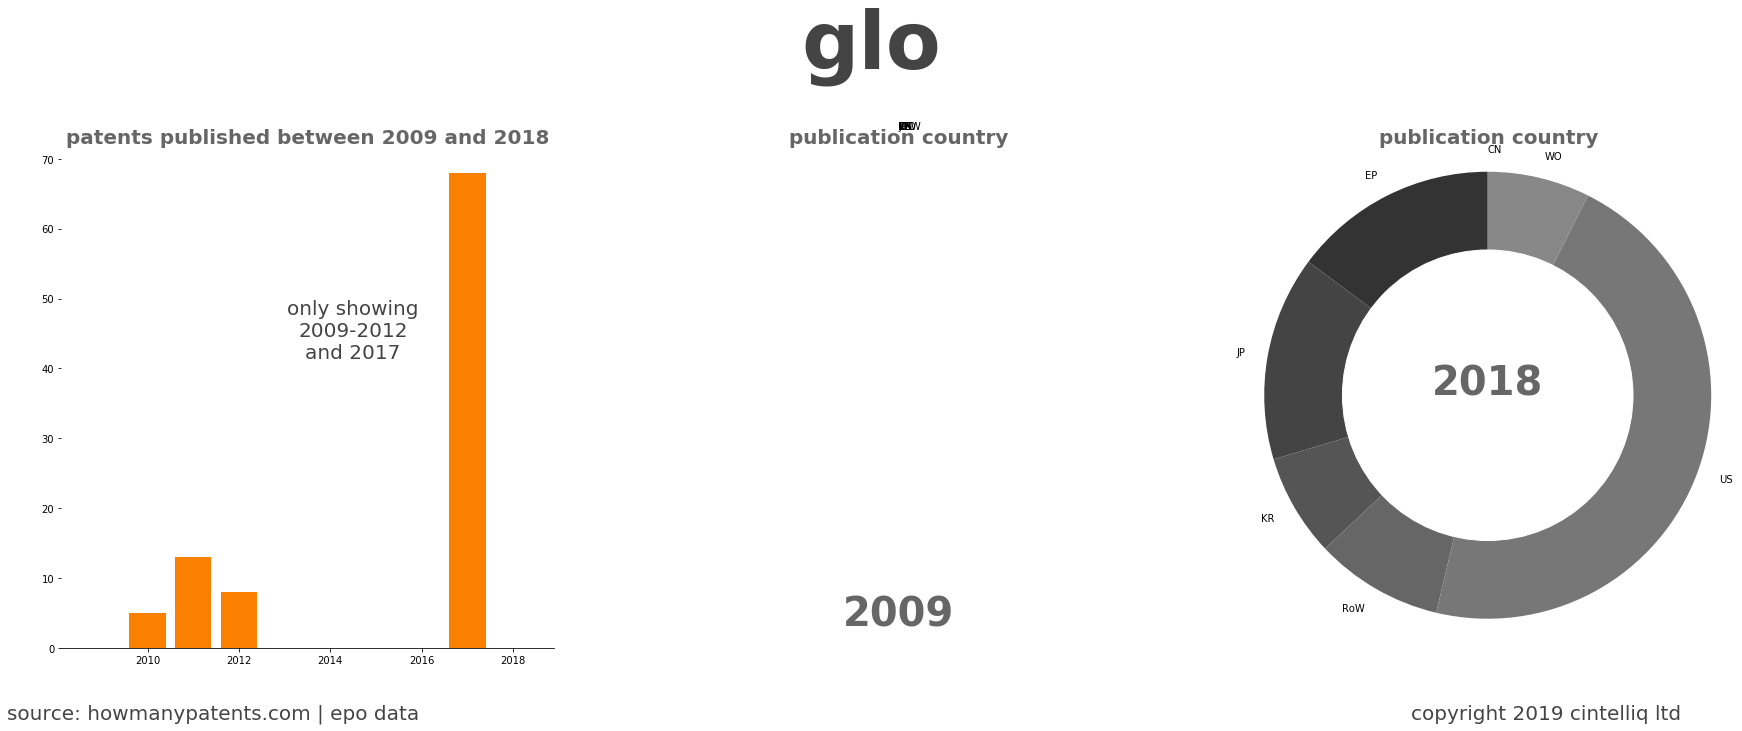 summary of patents for Glo